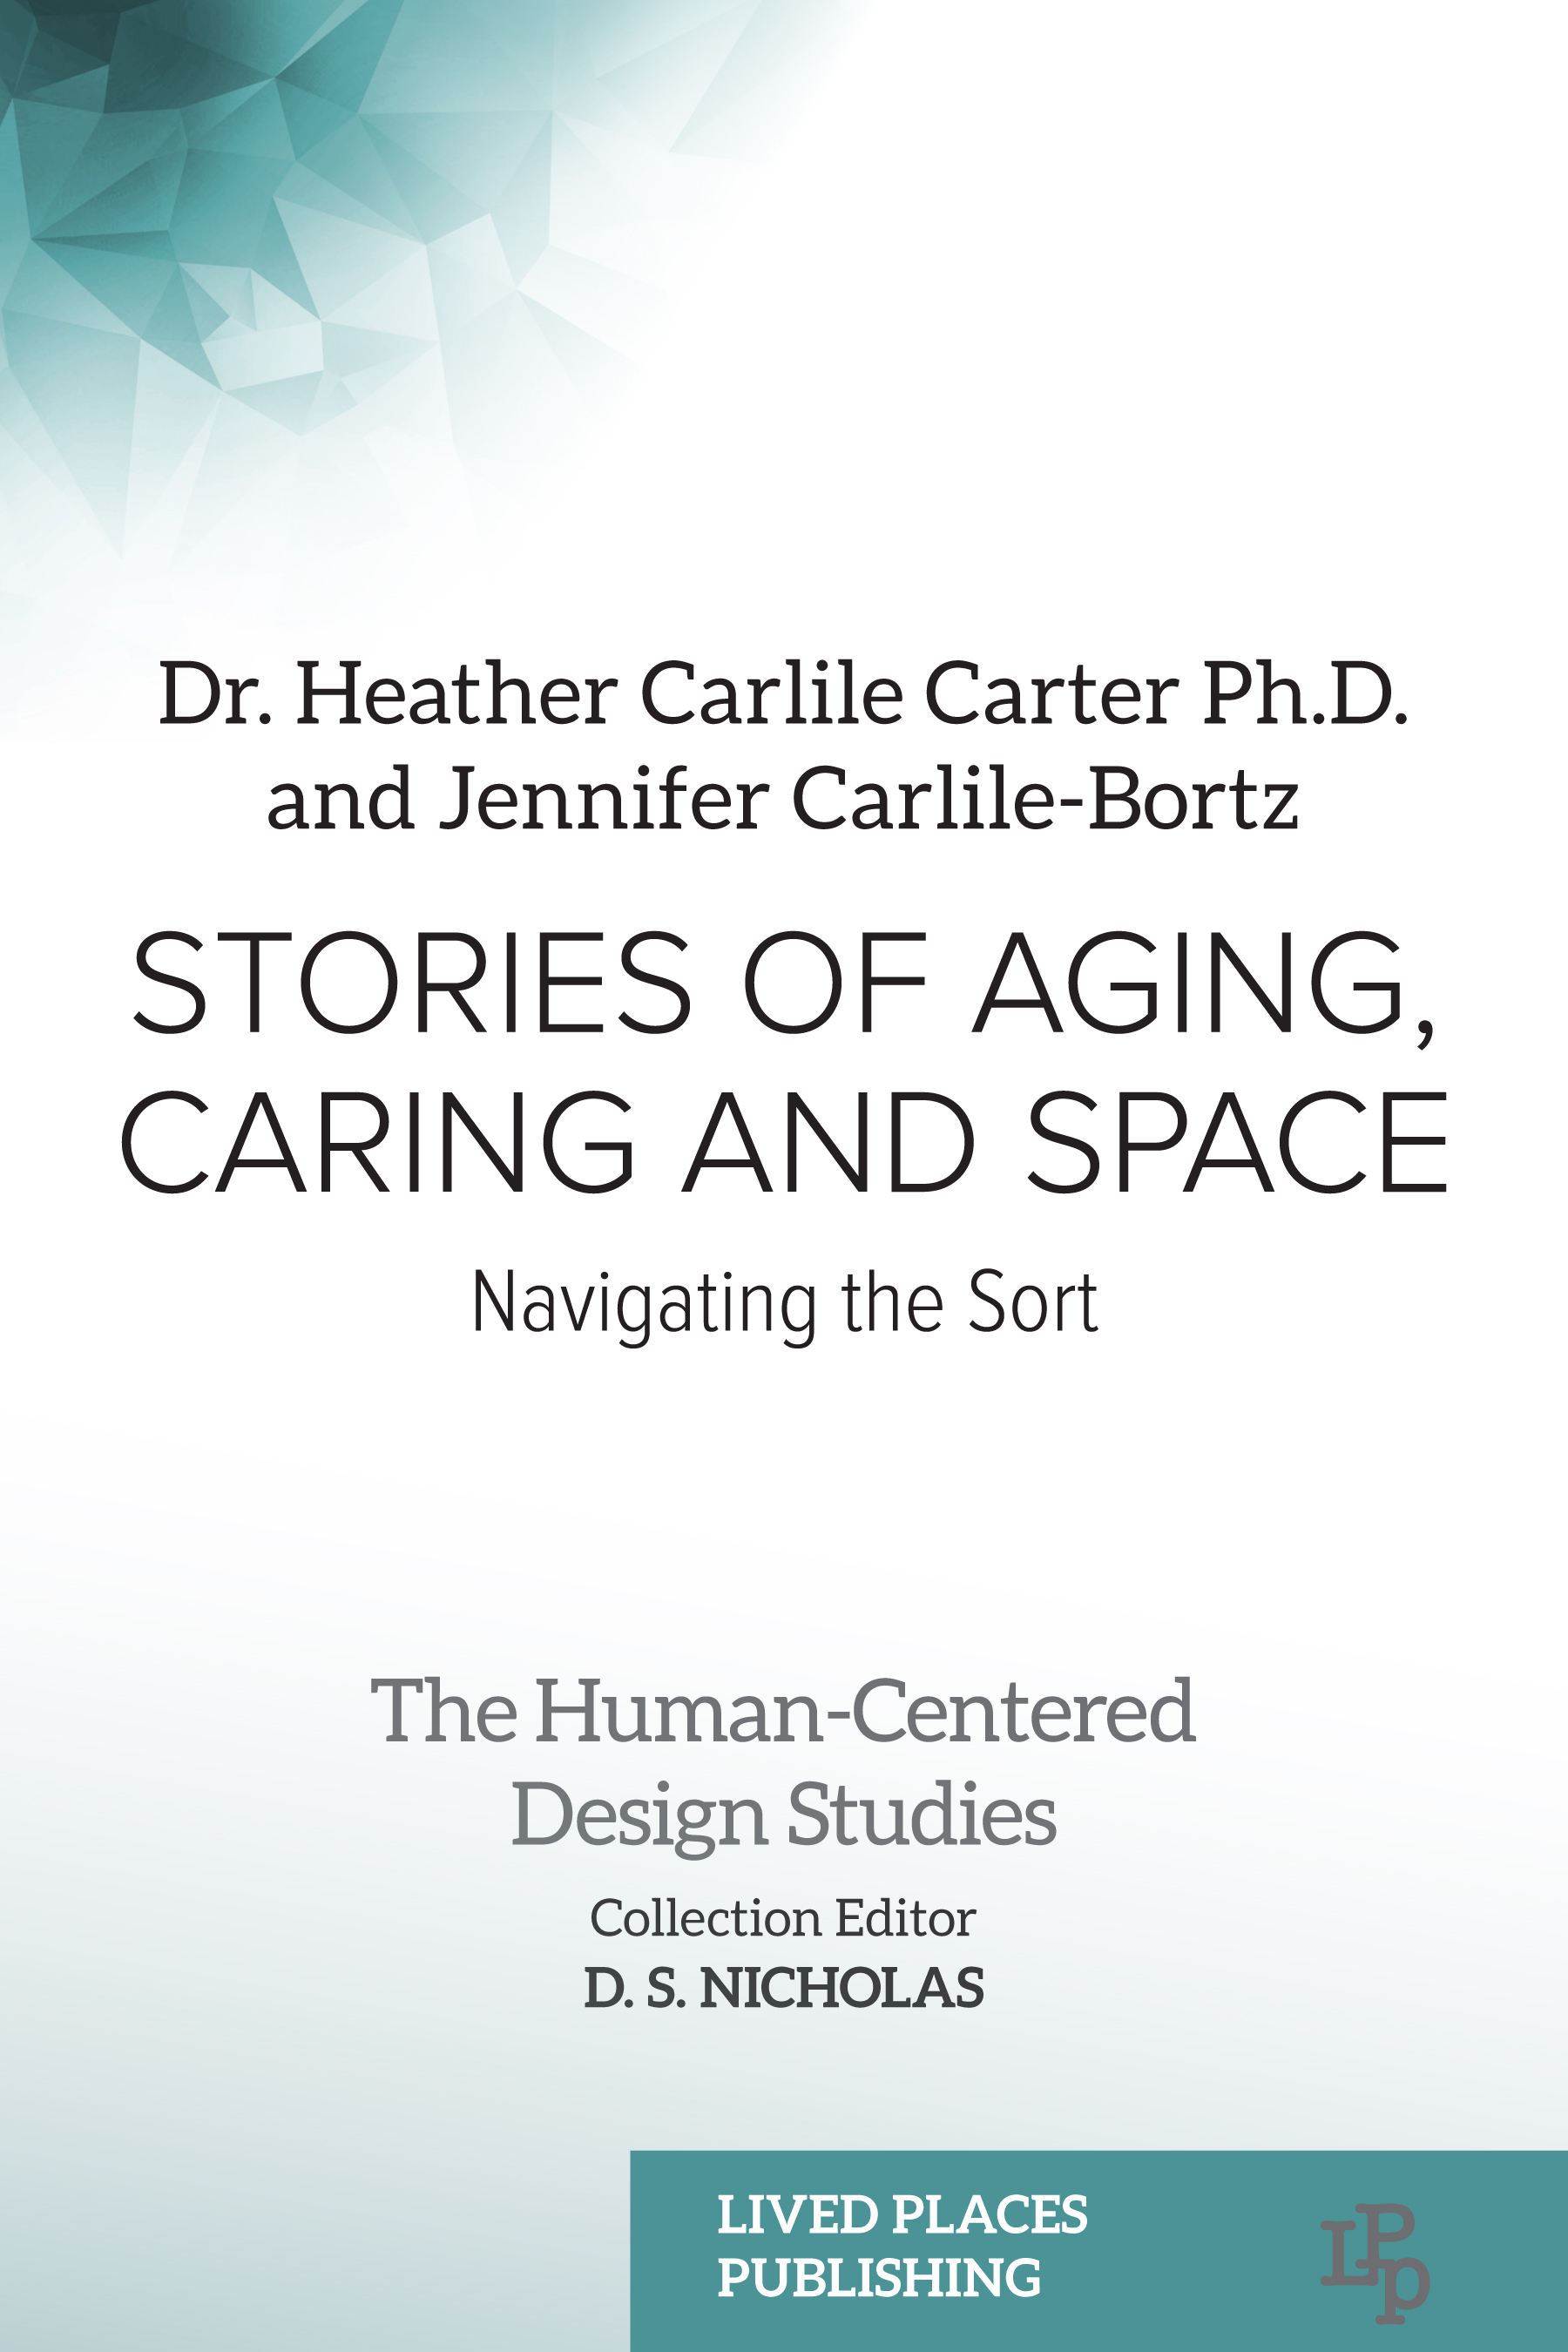 Stories of Aging, Caring and Space